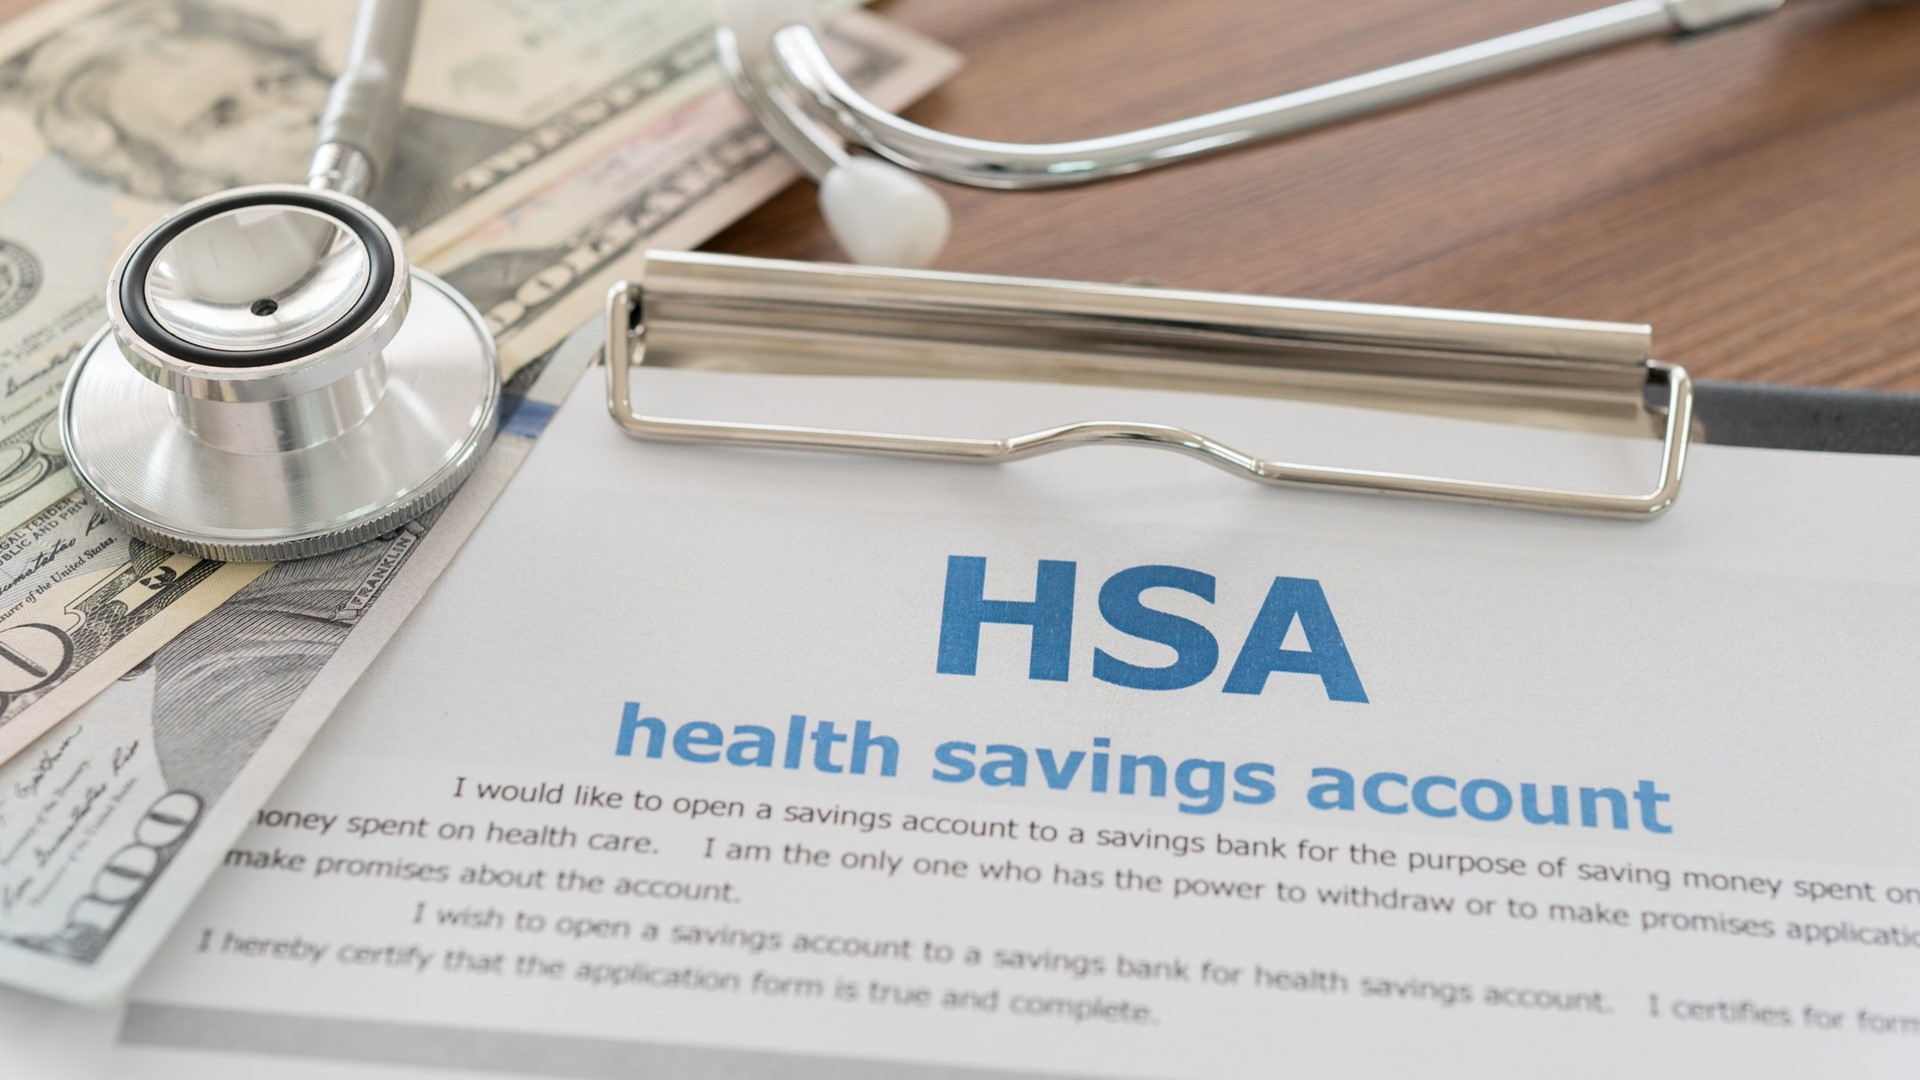 With the end of the year just a few weeks away, it's time to get your finances ready for the New Year. So do you need to spend all the money in your HSA account?